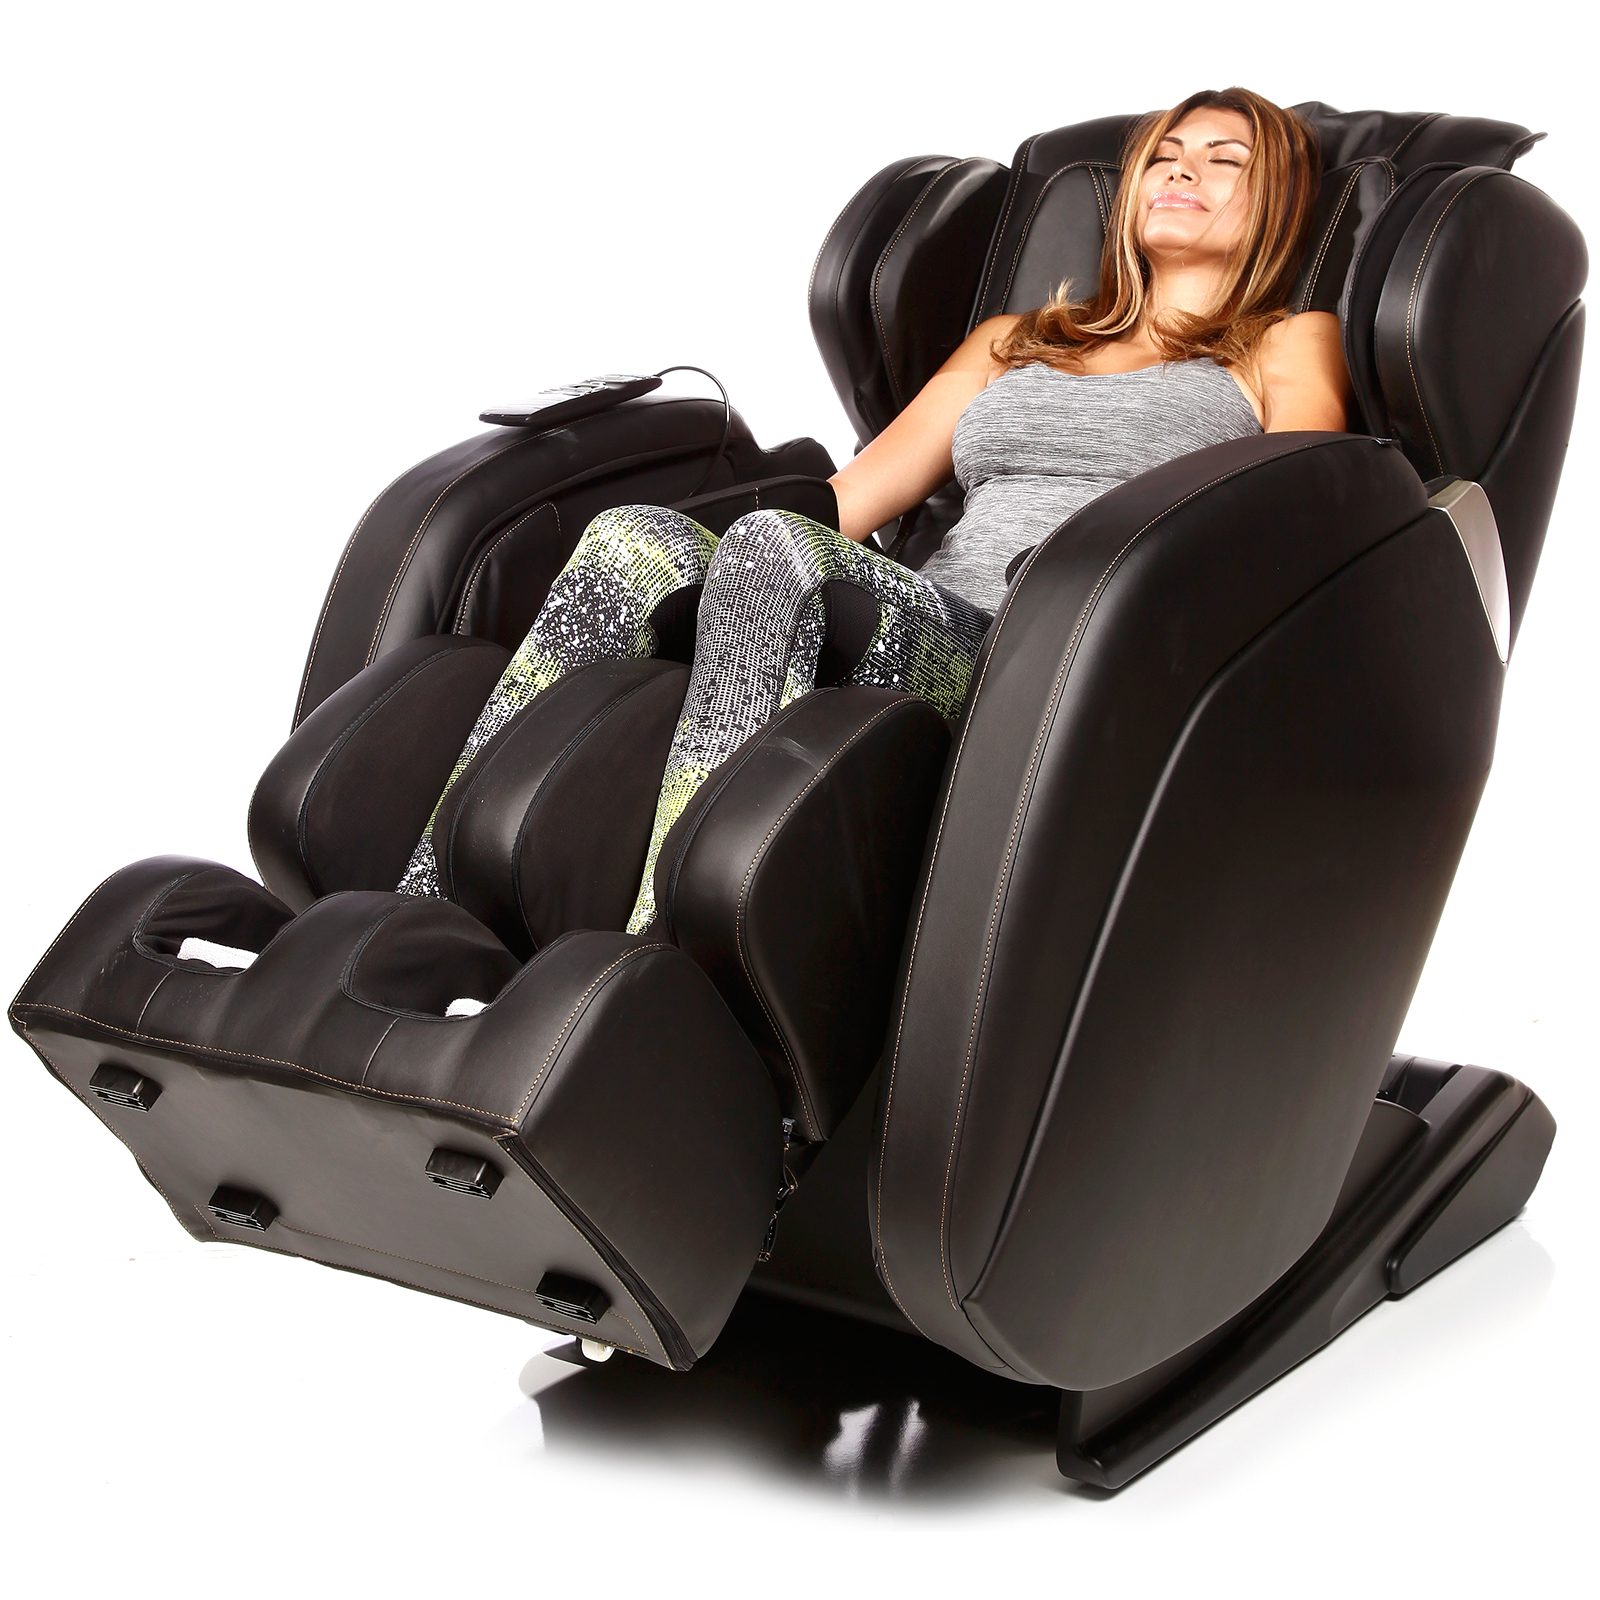 massage chairs and pregnancy - www.gklondon.co.uk.